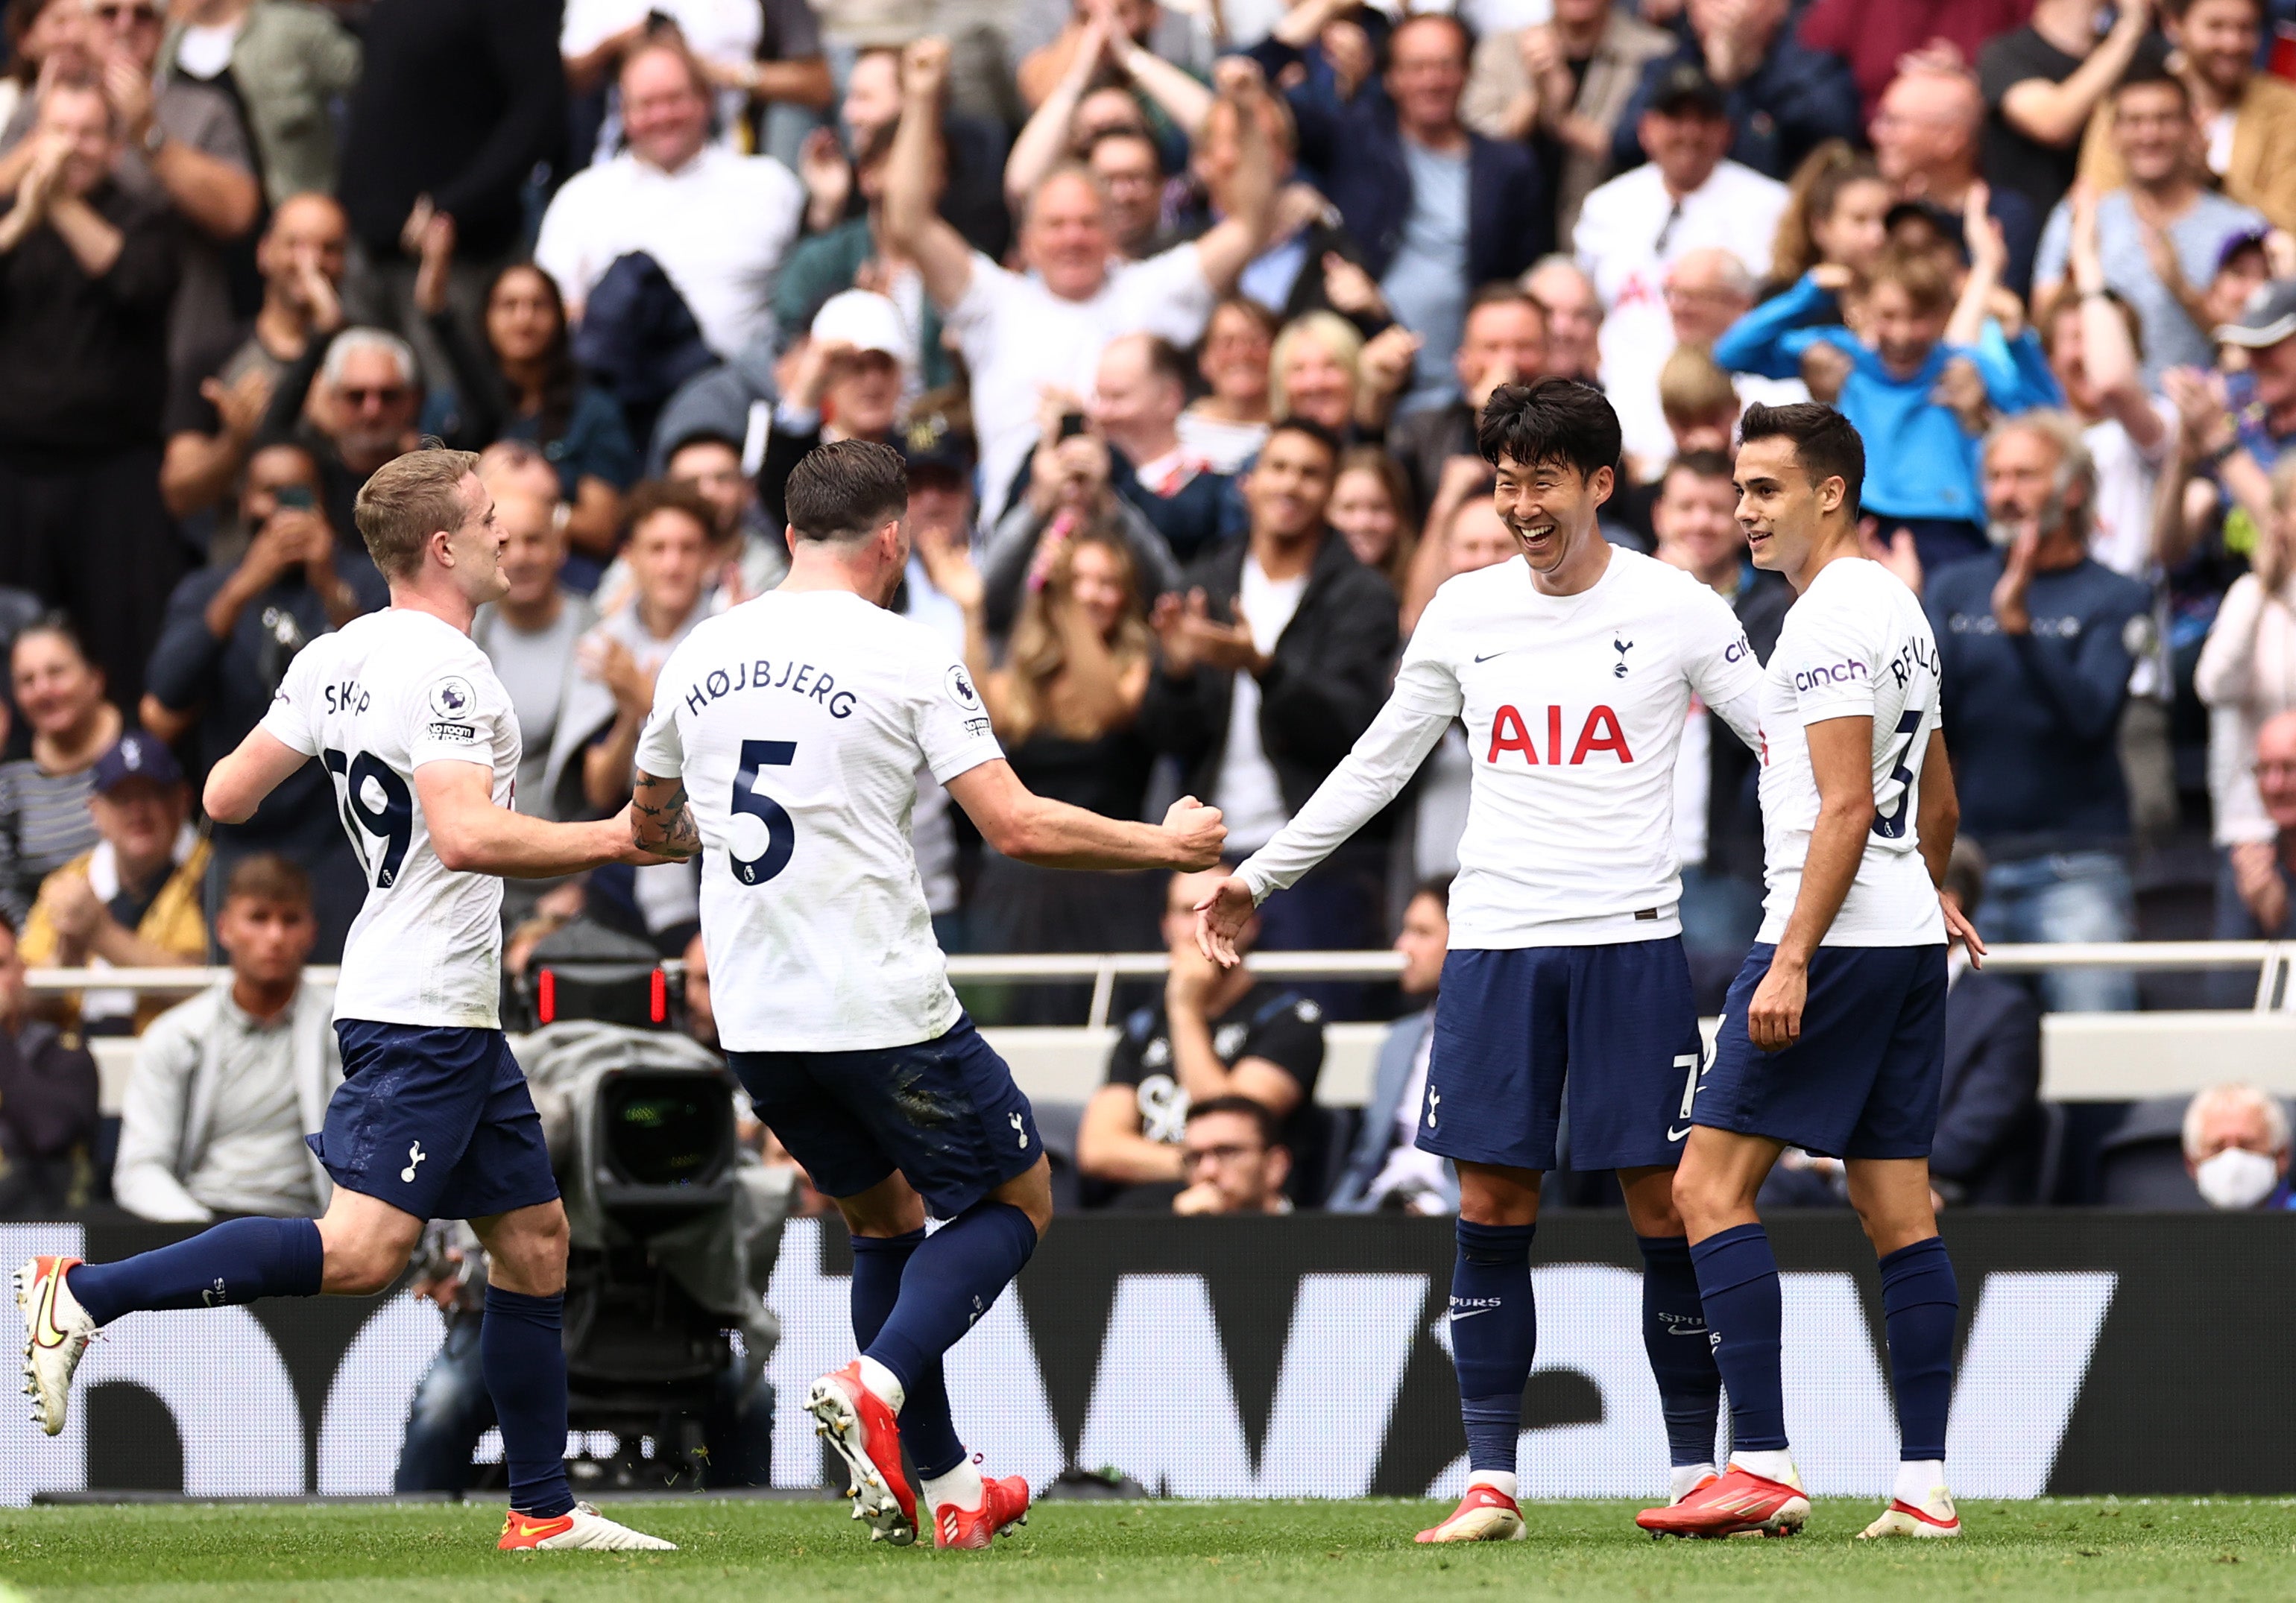 Can Tottenham keep winning without playing especially well?